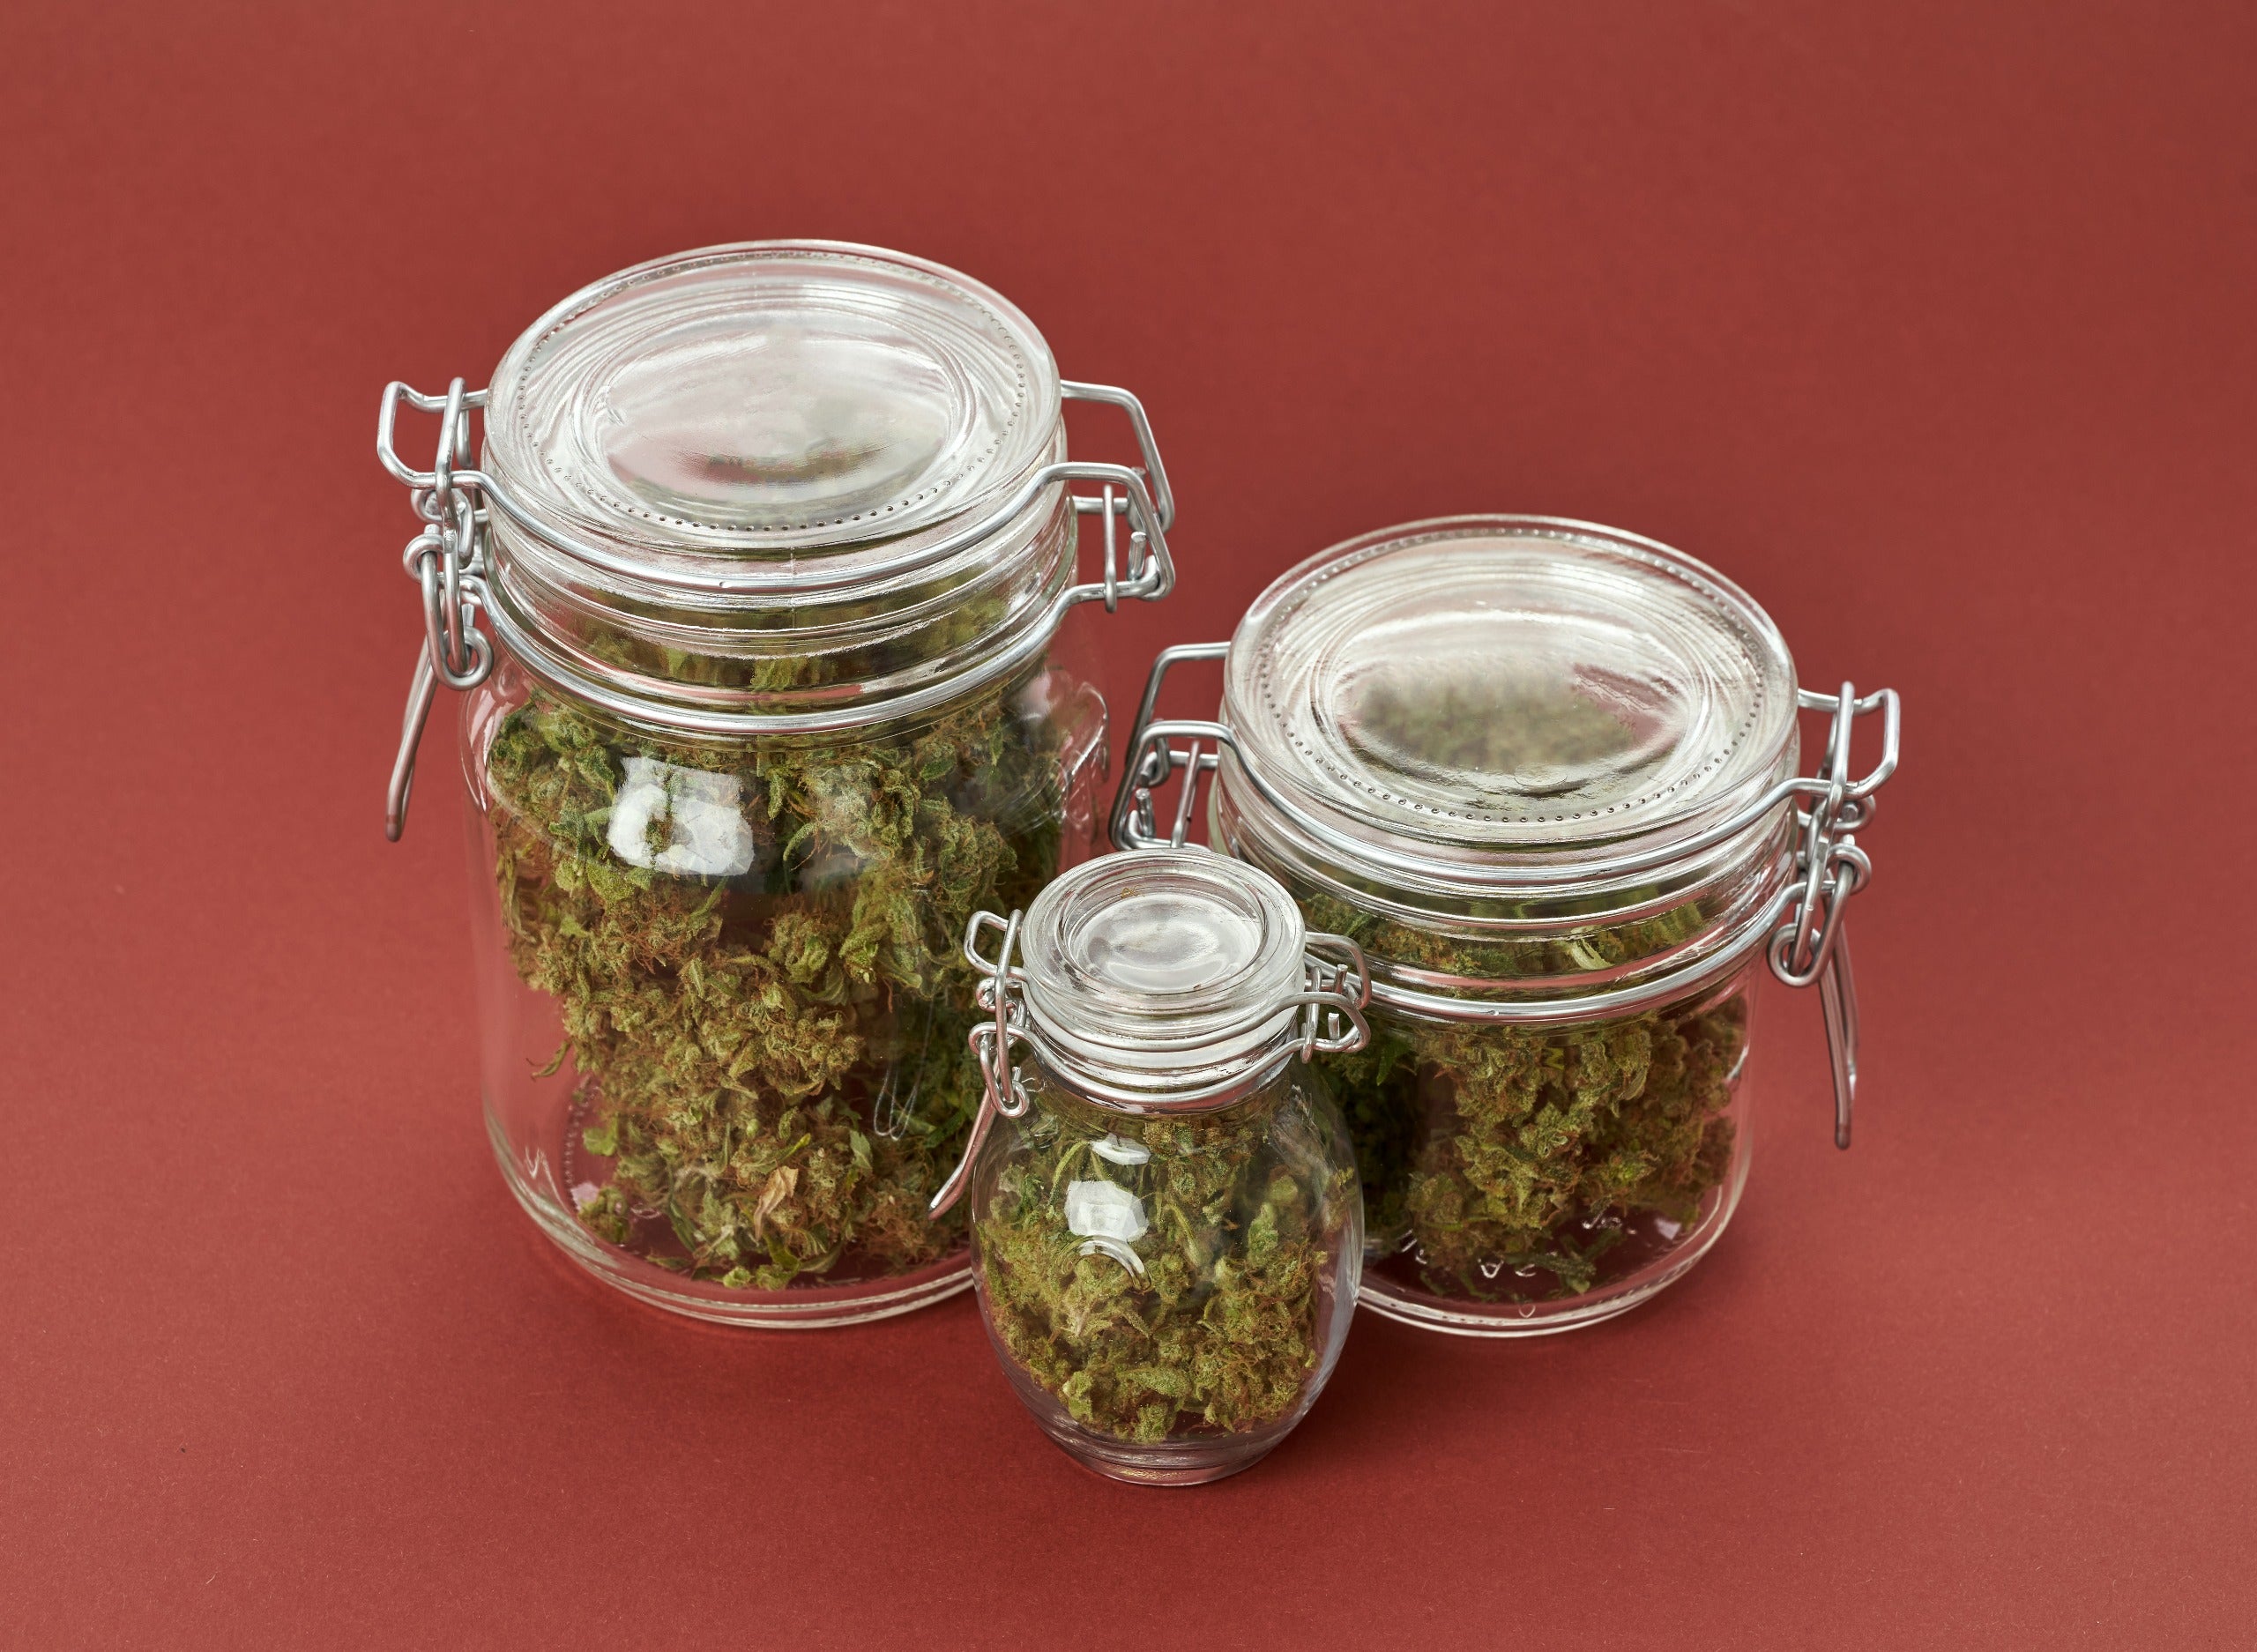 A Guide to Cannabis Jar Sizes